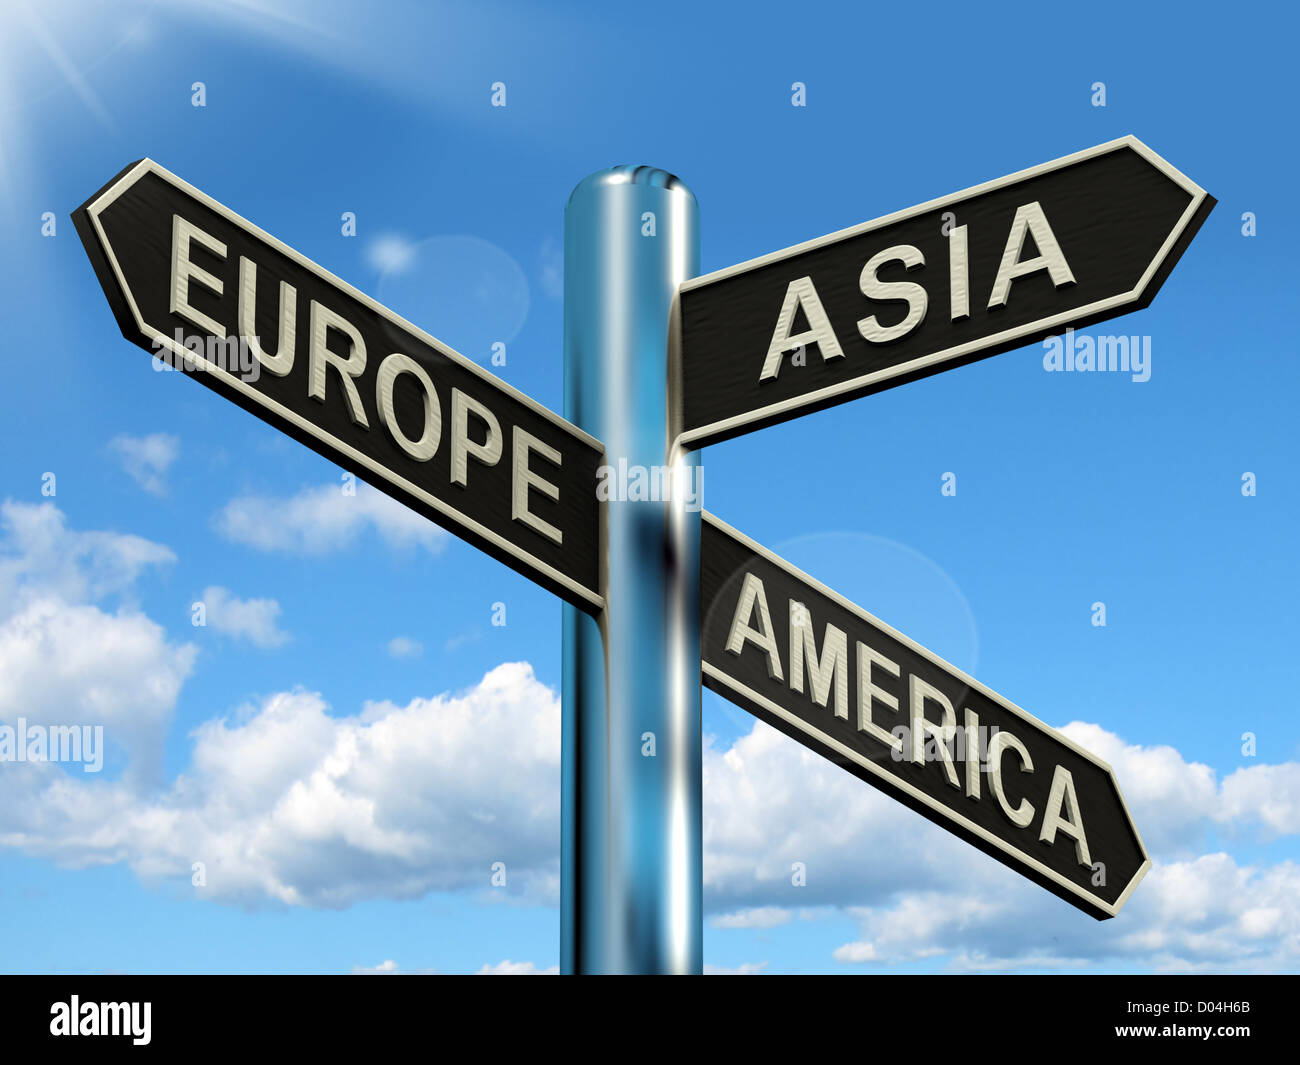 Europe Asia America Signpost Shows Continents For Travel Or Tourism Stock Photo